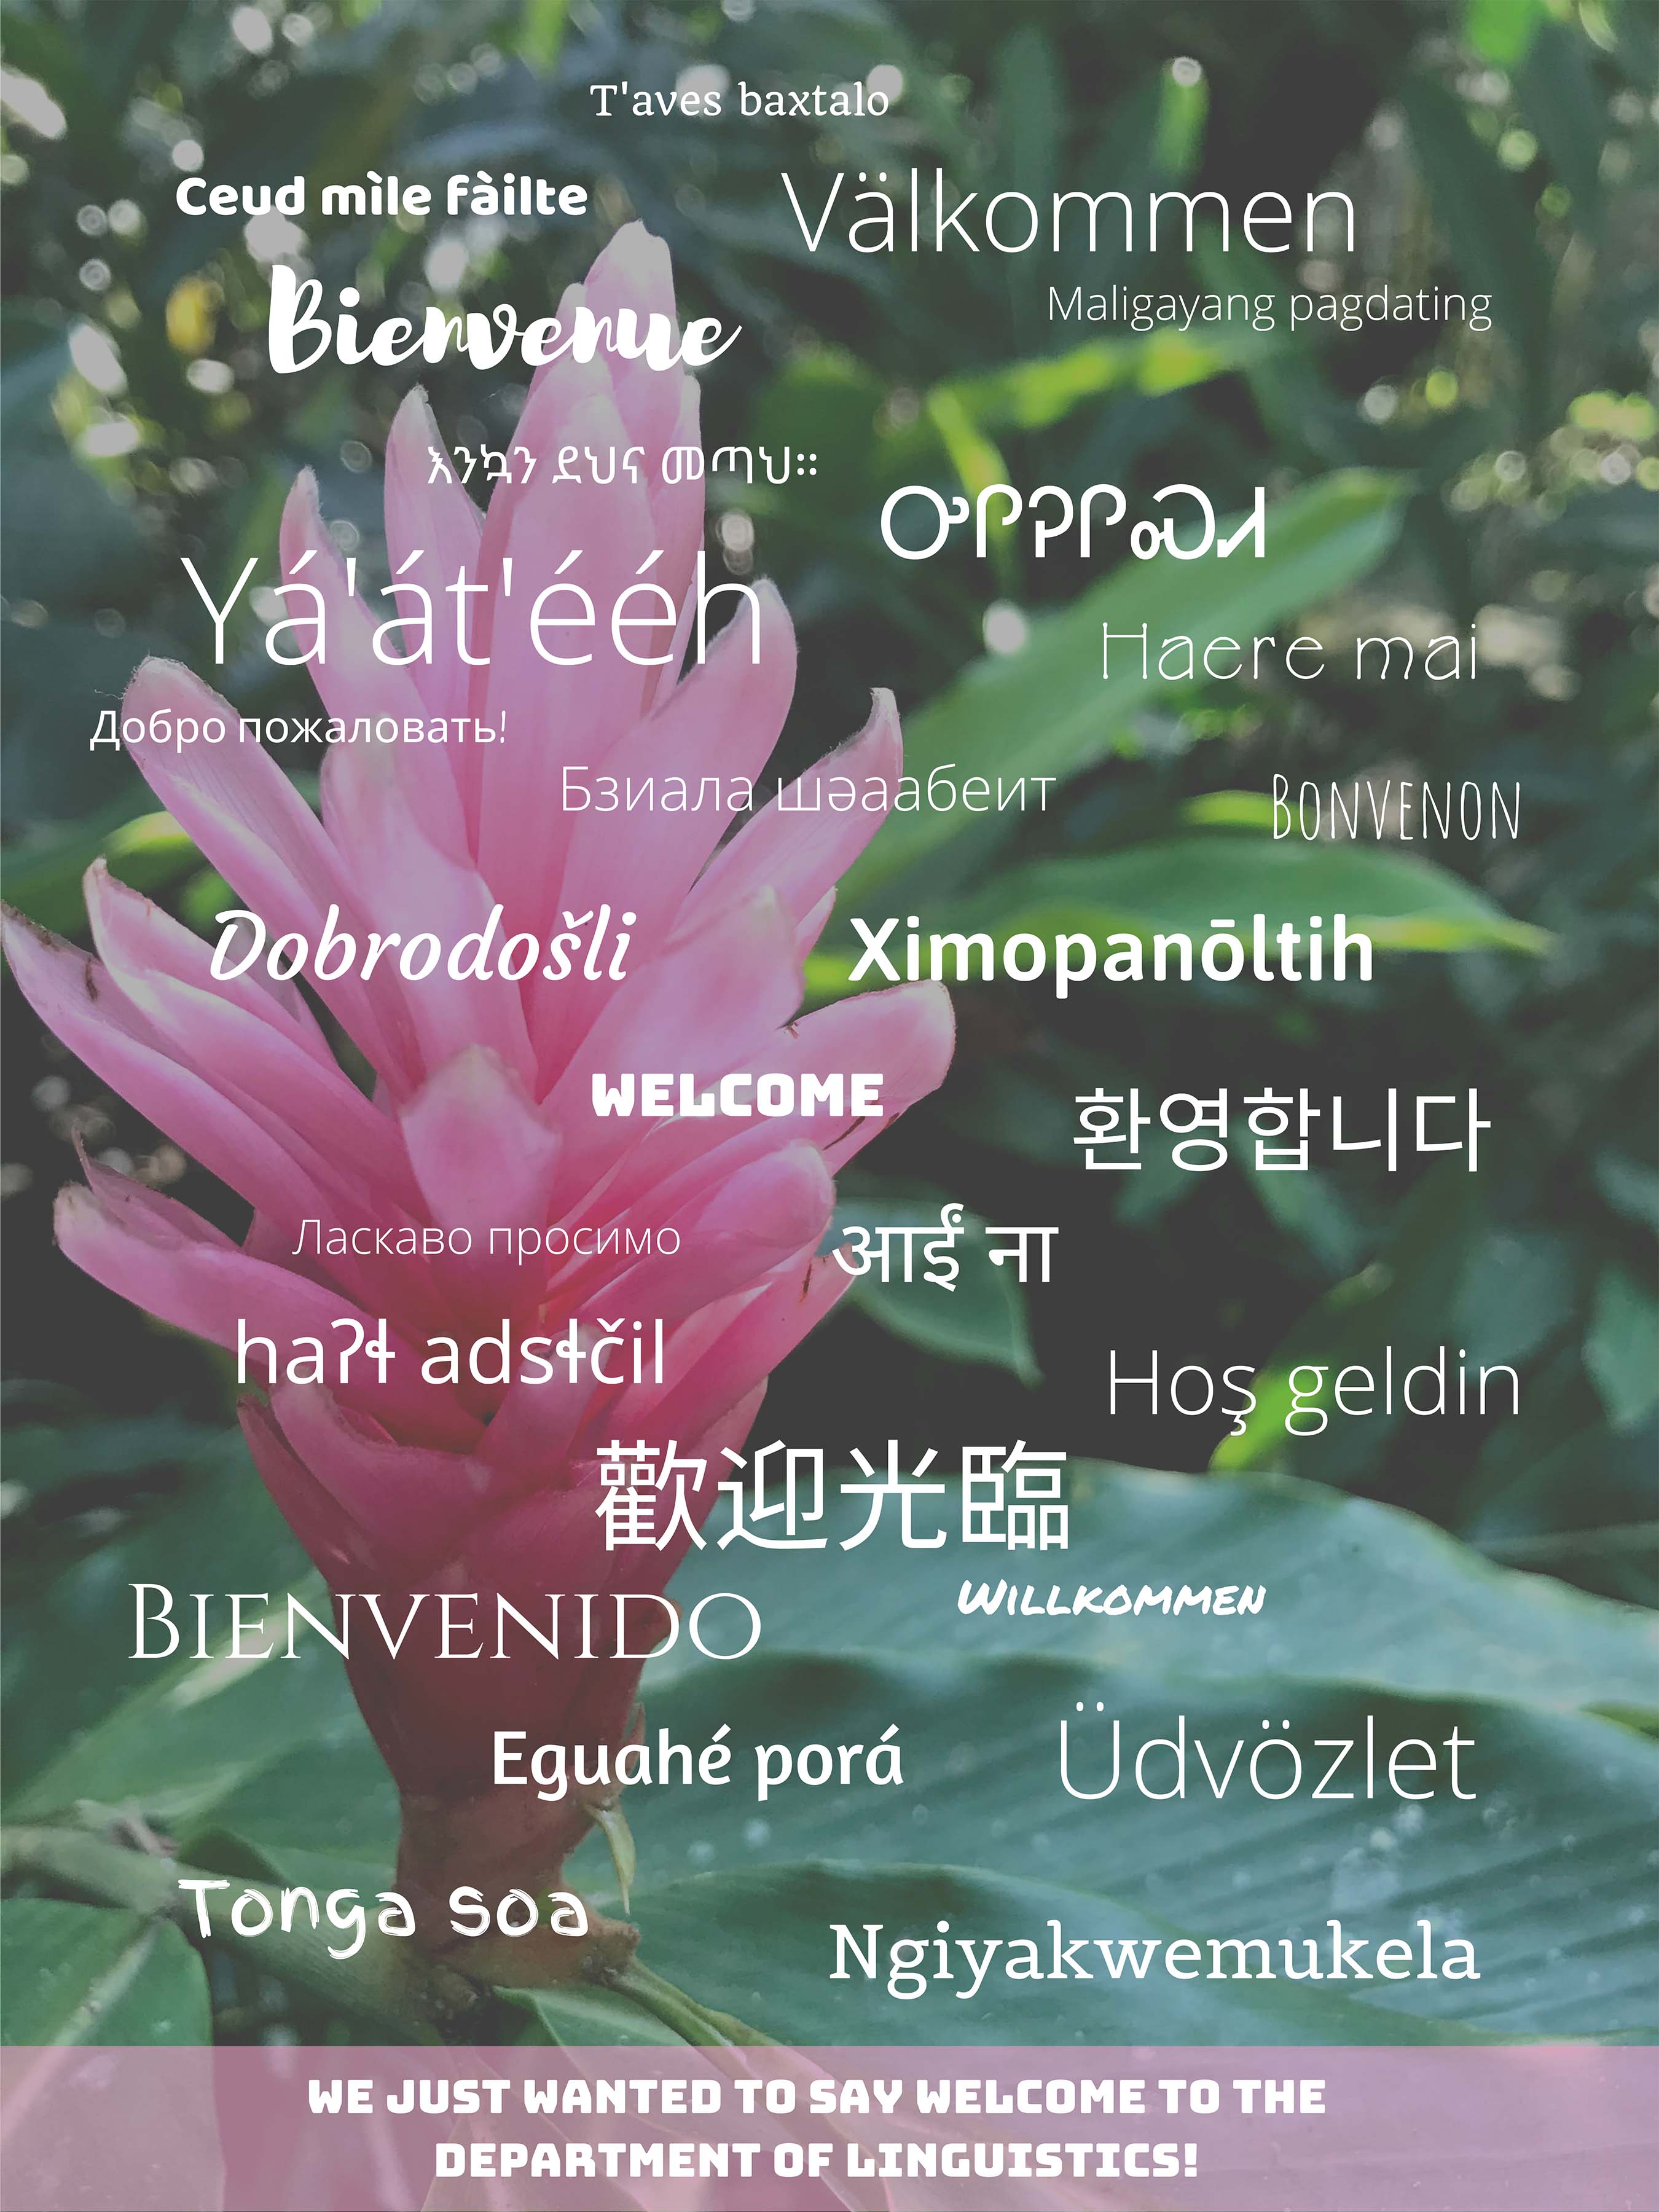 "Welcome" in several different languages. Click to see full description.